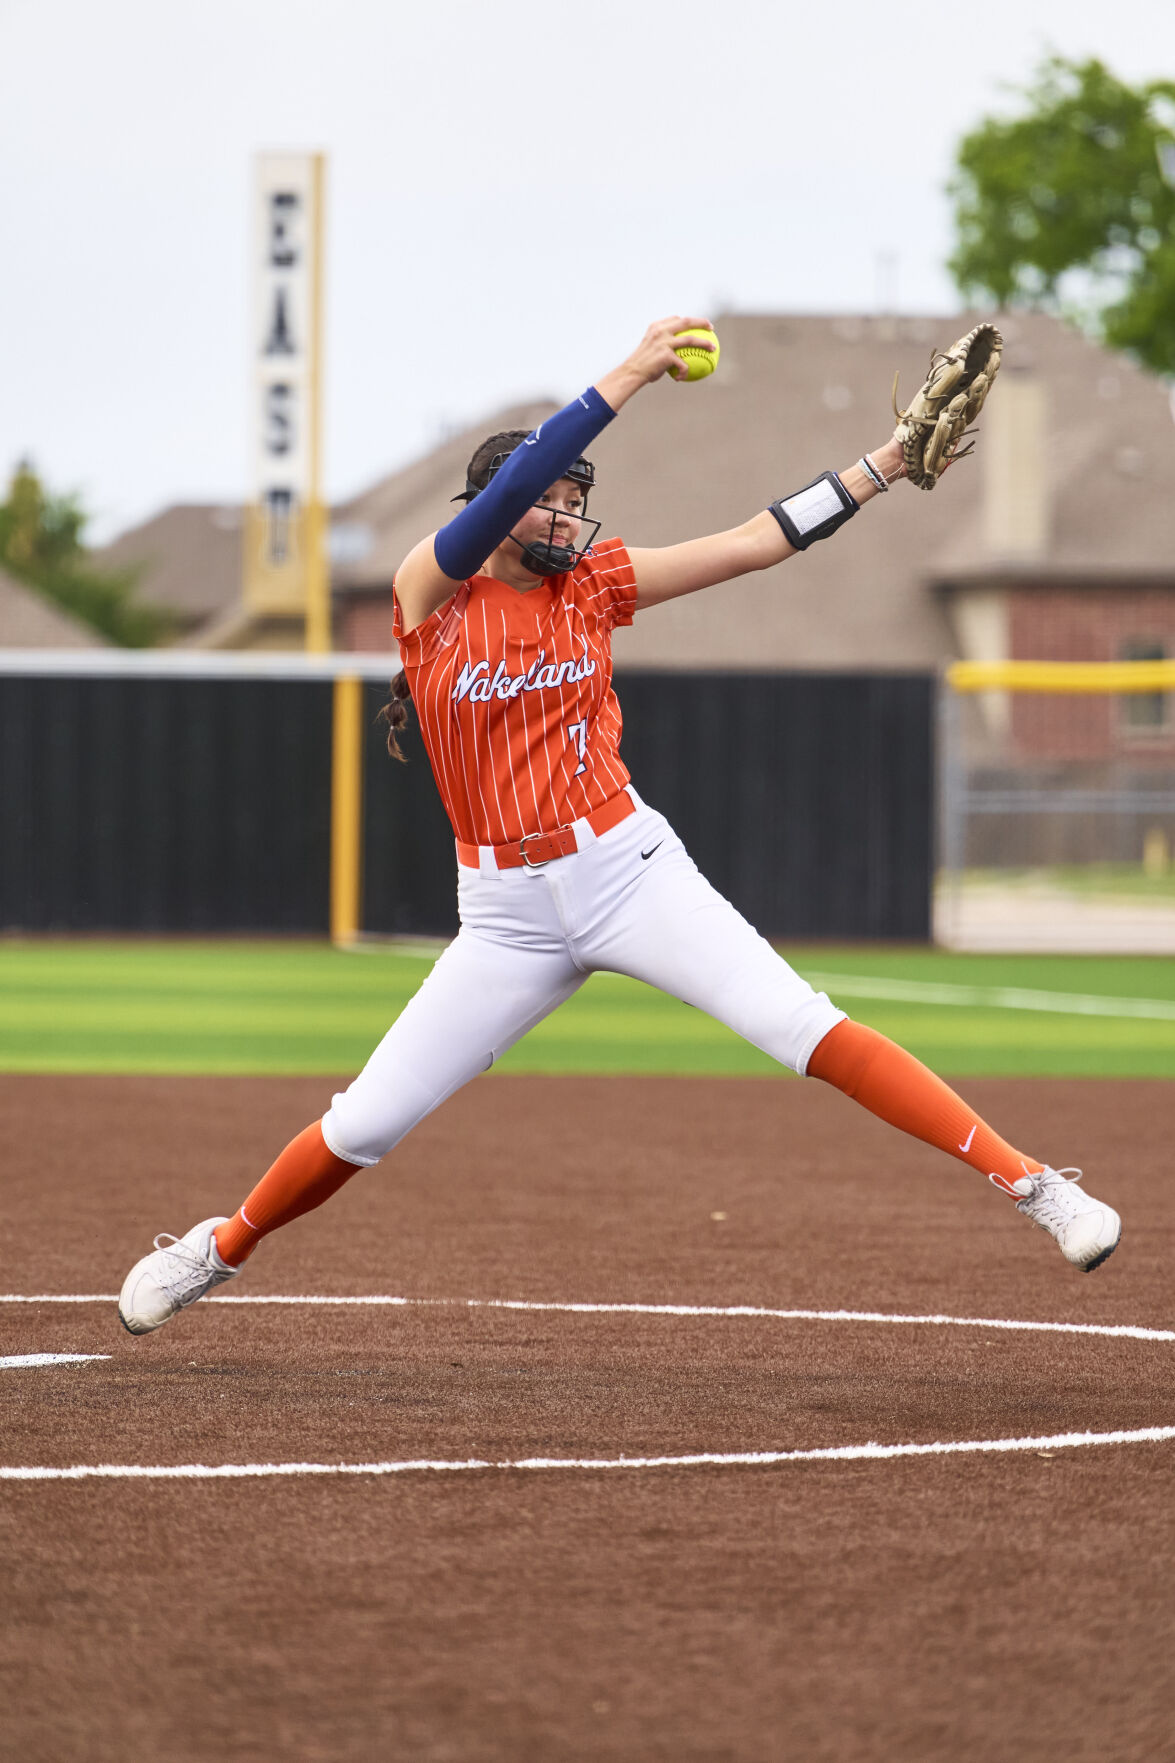 Winner take all: Wakeland tops Poteet in one-game playoff